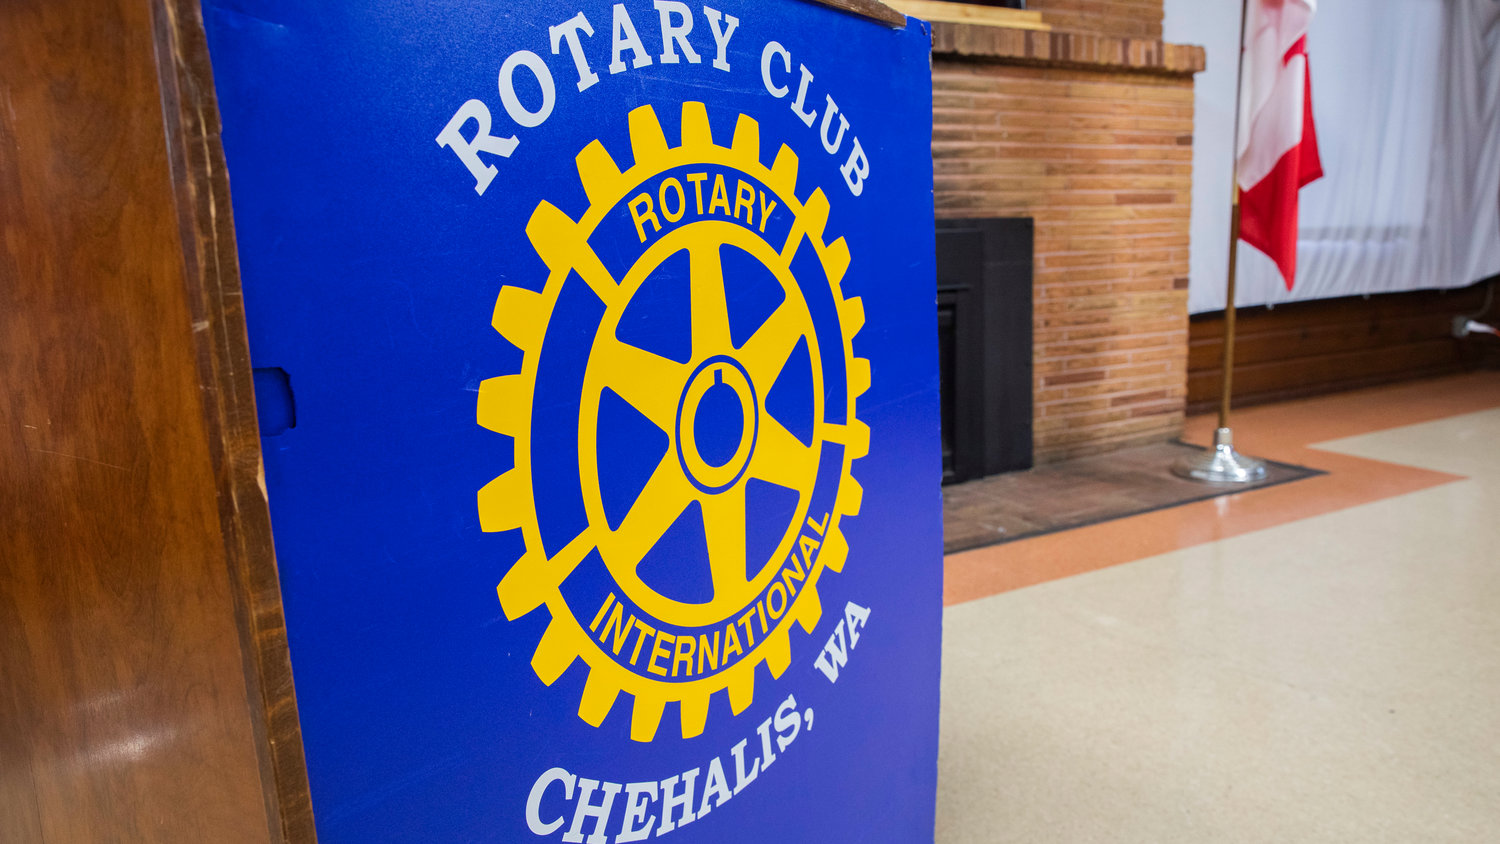 The Chehalis Rotary Club meets on Wednesdays inside the Virgil R. Lee Community Building in Chehalis.